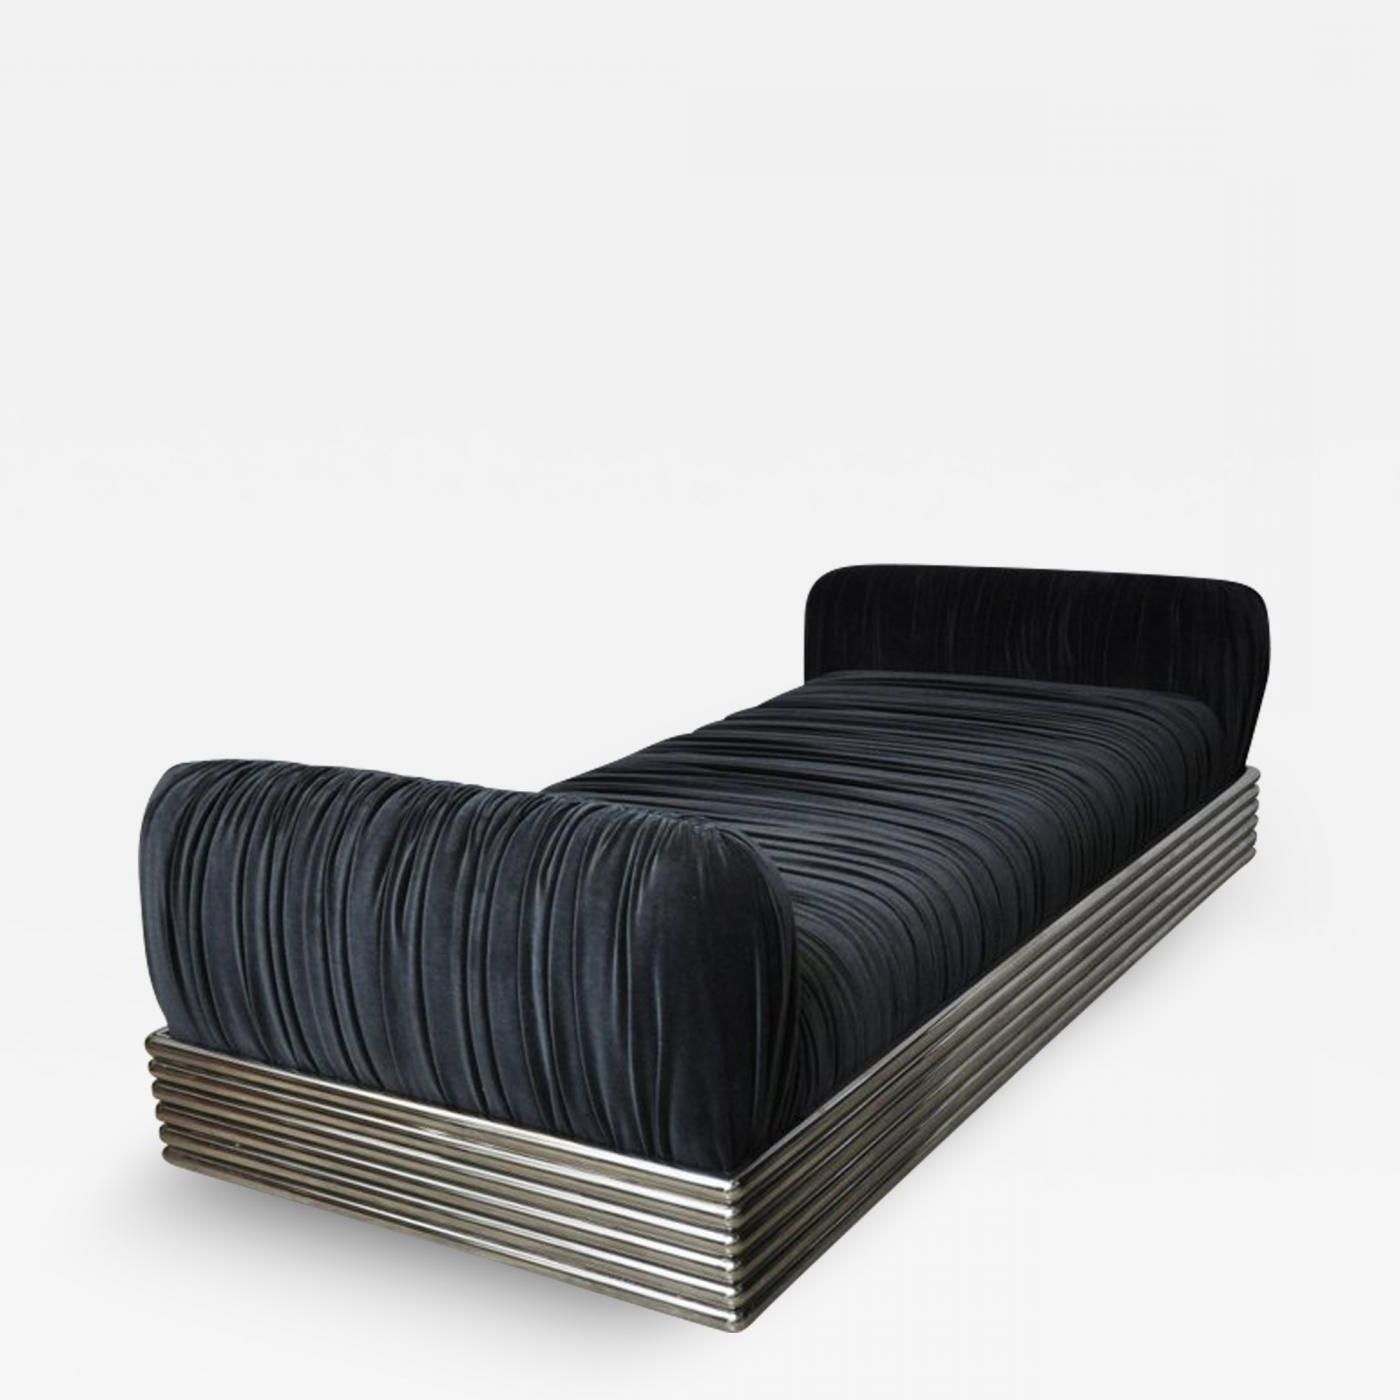 Brueton – Brueton Radiator Chaise Longue Daybed For Fashionable Daybed Chaises (Photo 13 of 15)